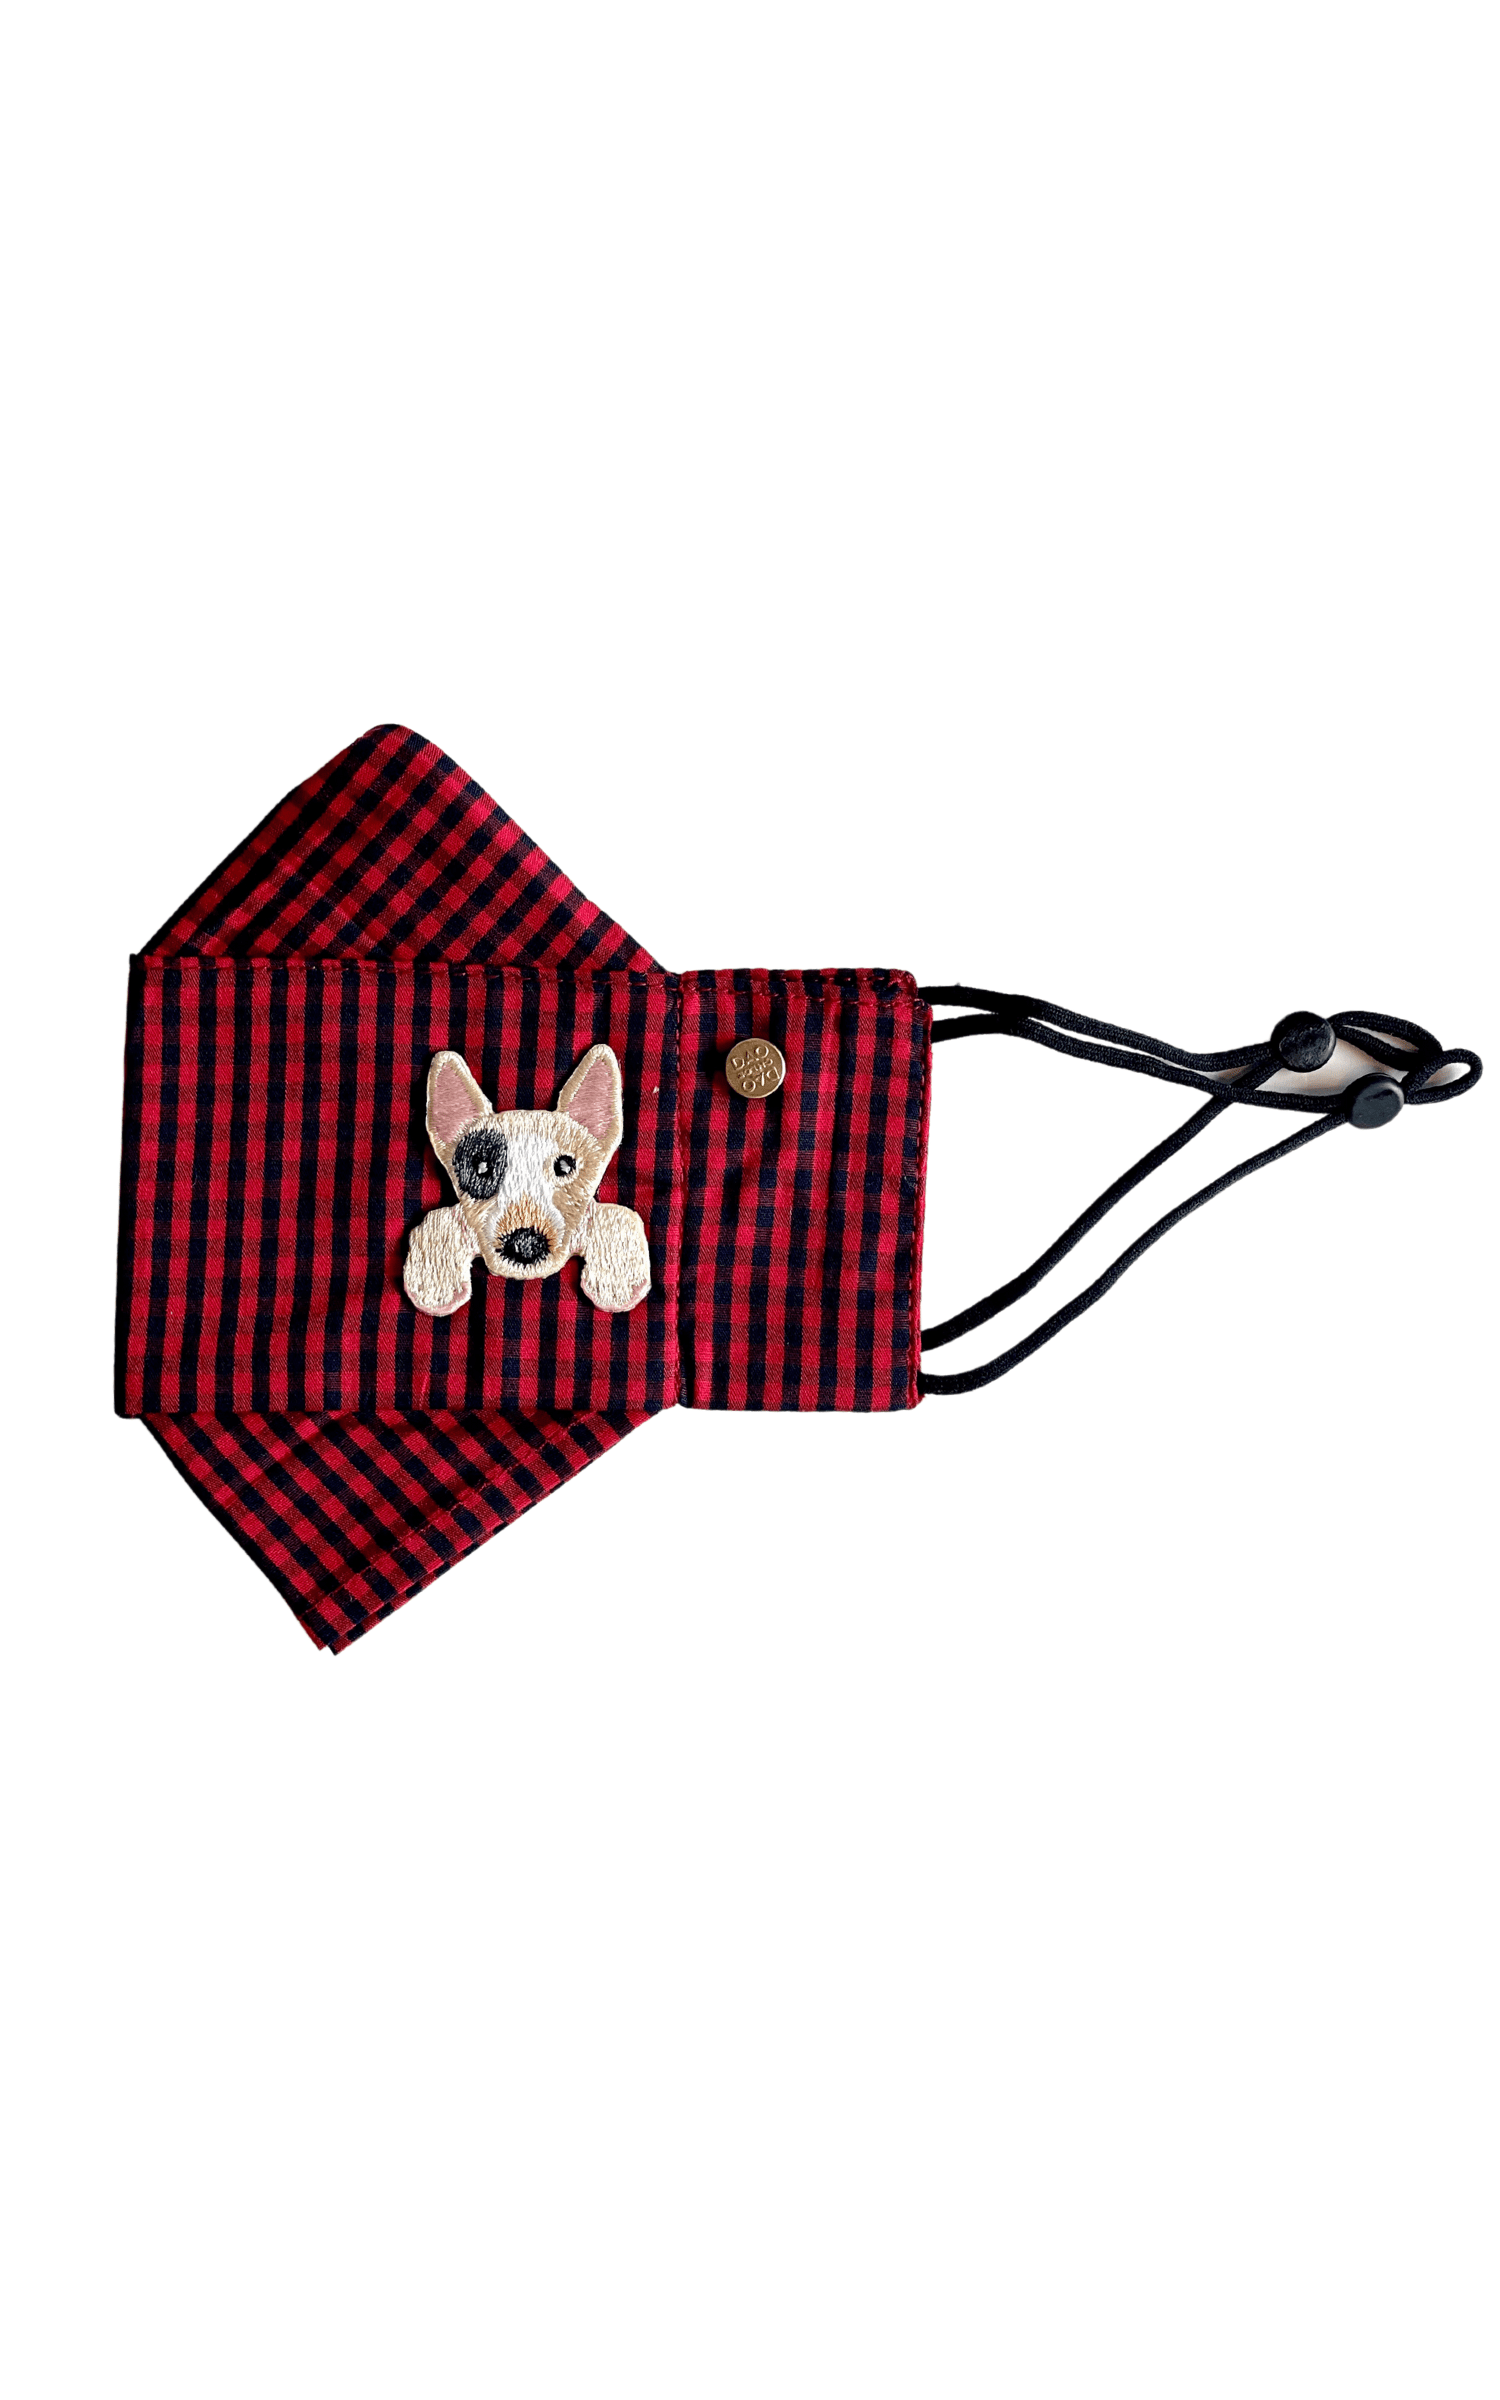 Box Pleated Face Masks Bull Terrier Red Gingham Box Pleat Mask ( w Filter Pocket) - Chloe Dao